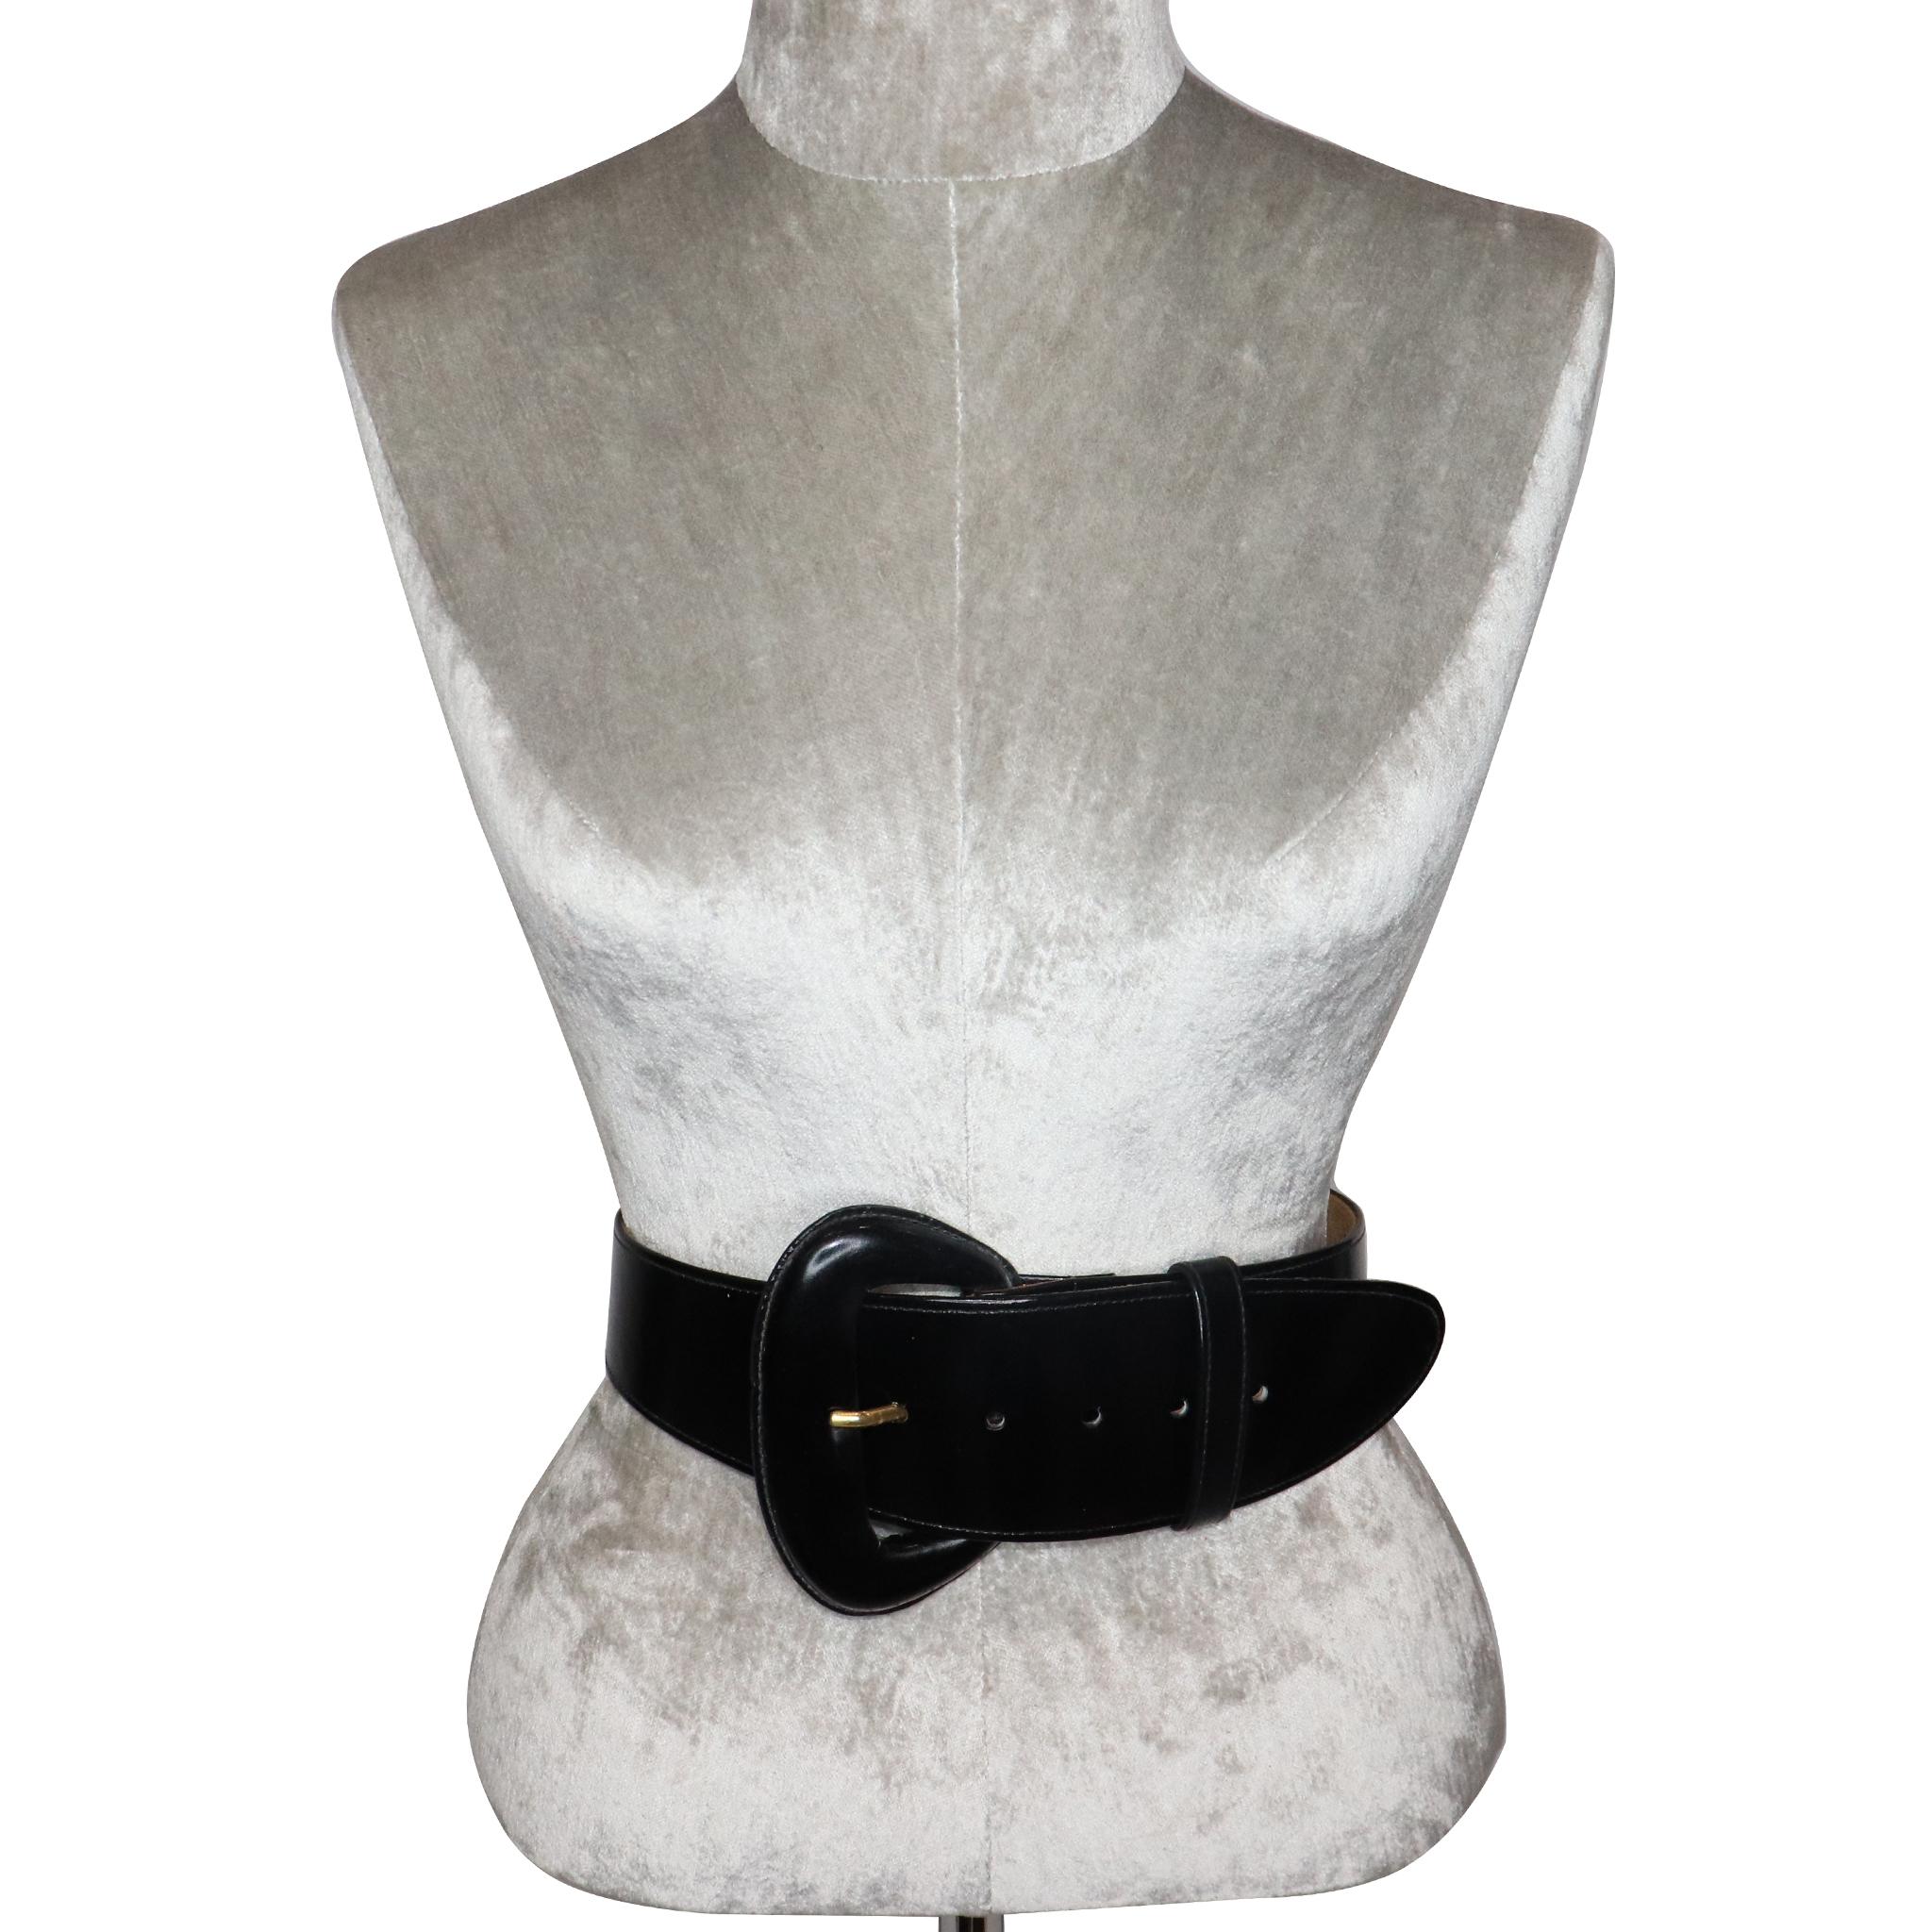 Donna Karan Black High Gloss Box Leather Belt w/ Oval Buckle Circa 1990s. In excellent condition 
Natural aging to the leather  

Measurements-

Longest length: 29.5 Inches
Shortest length: 25.5 inches 